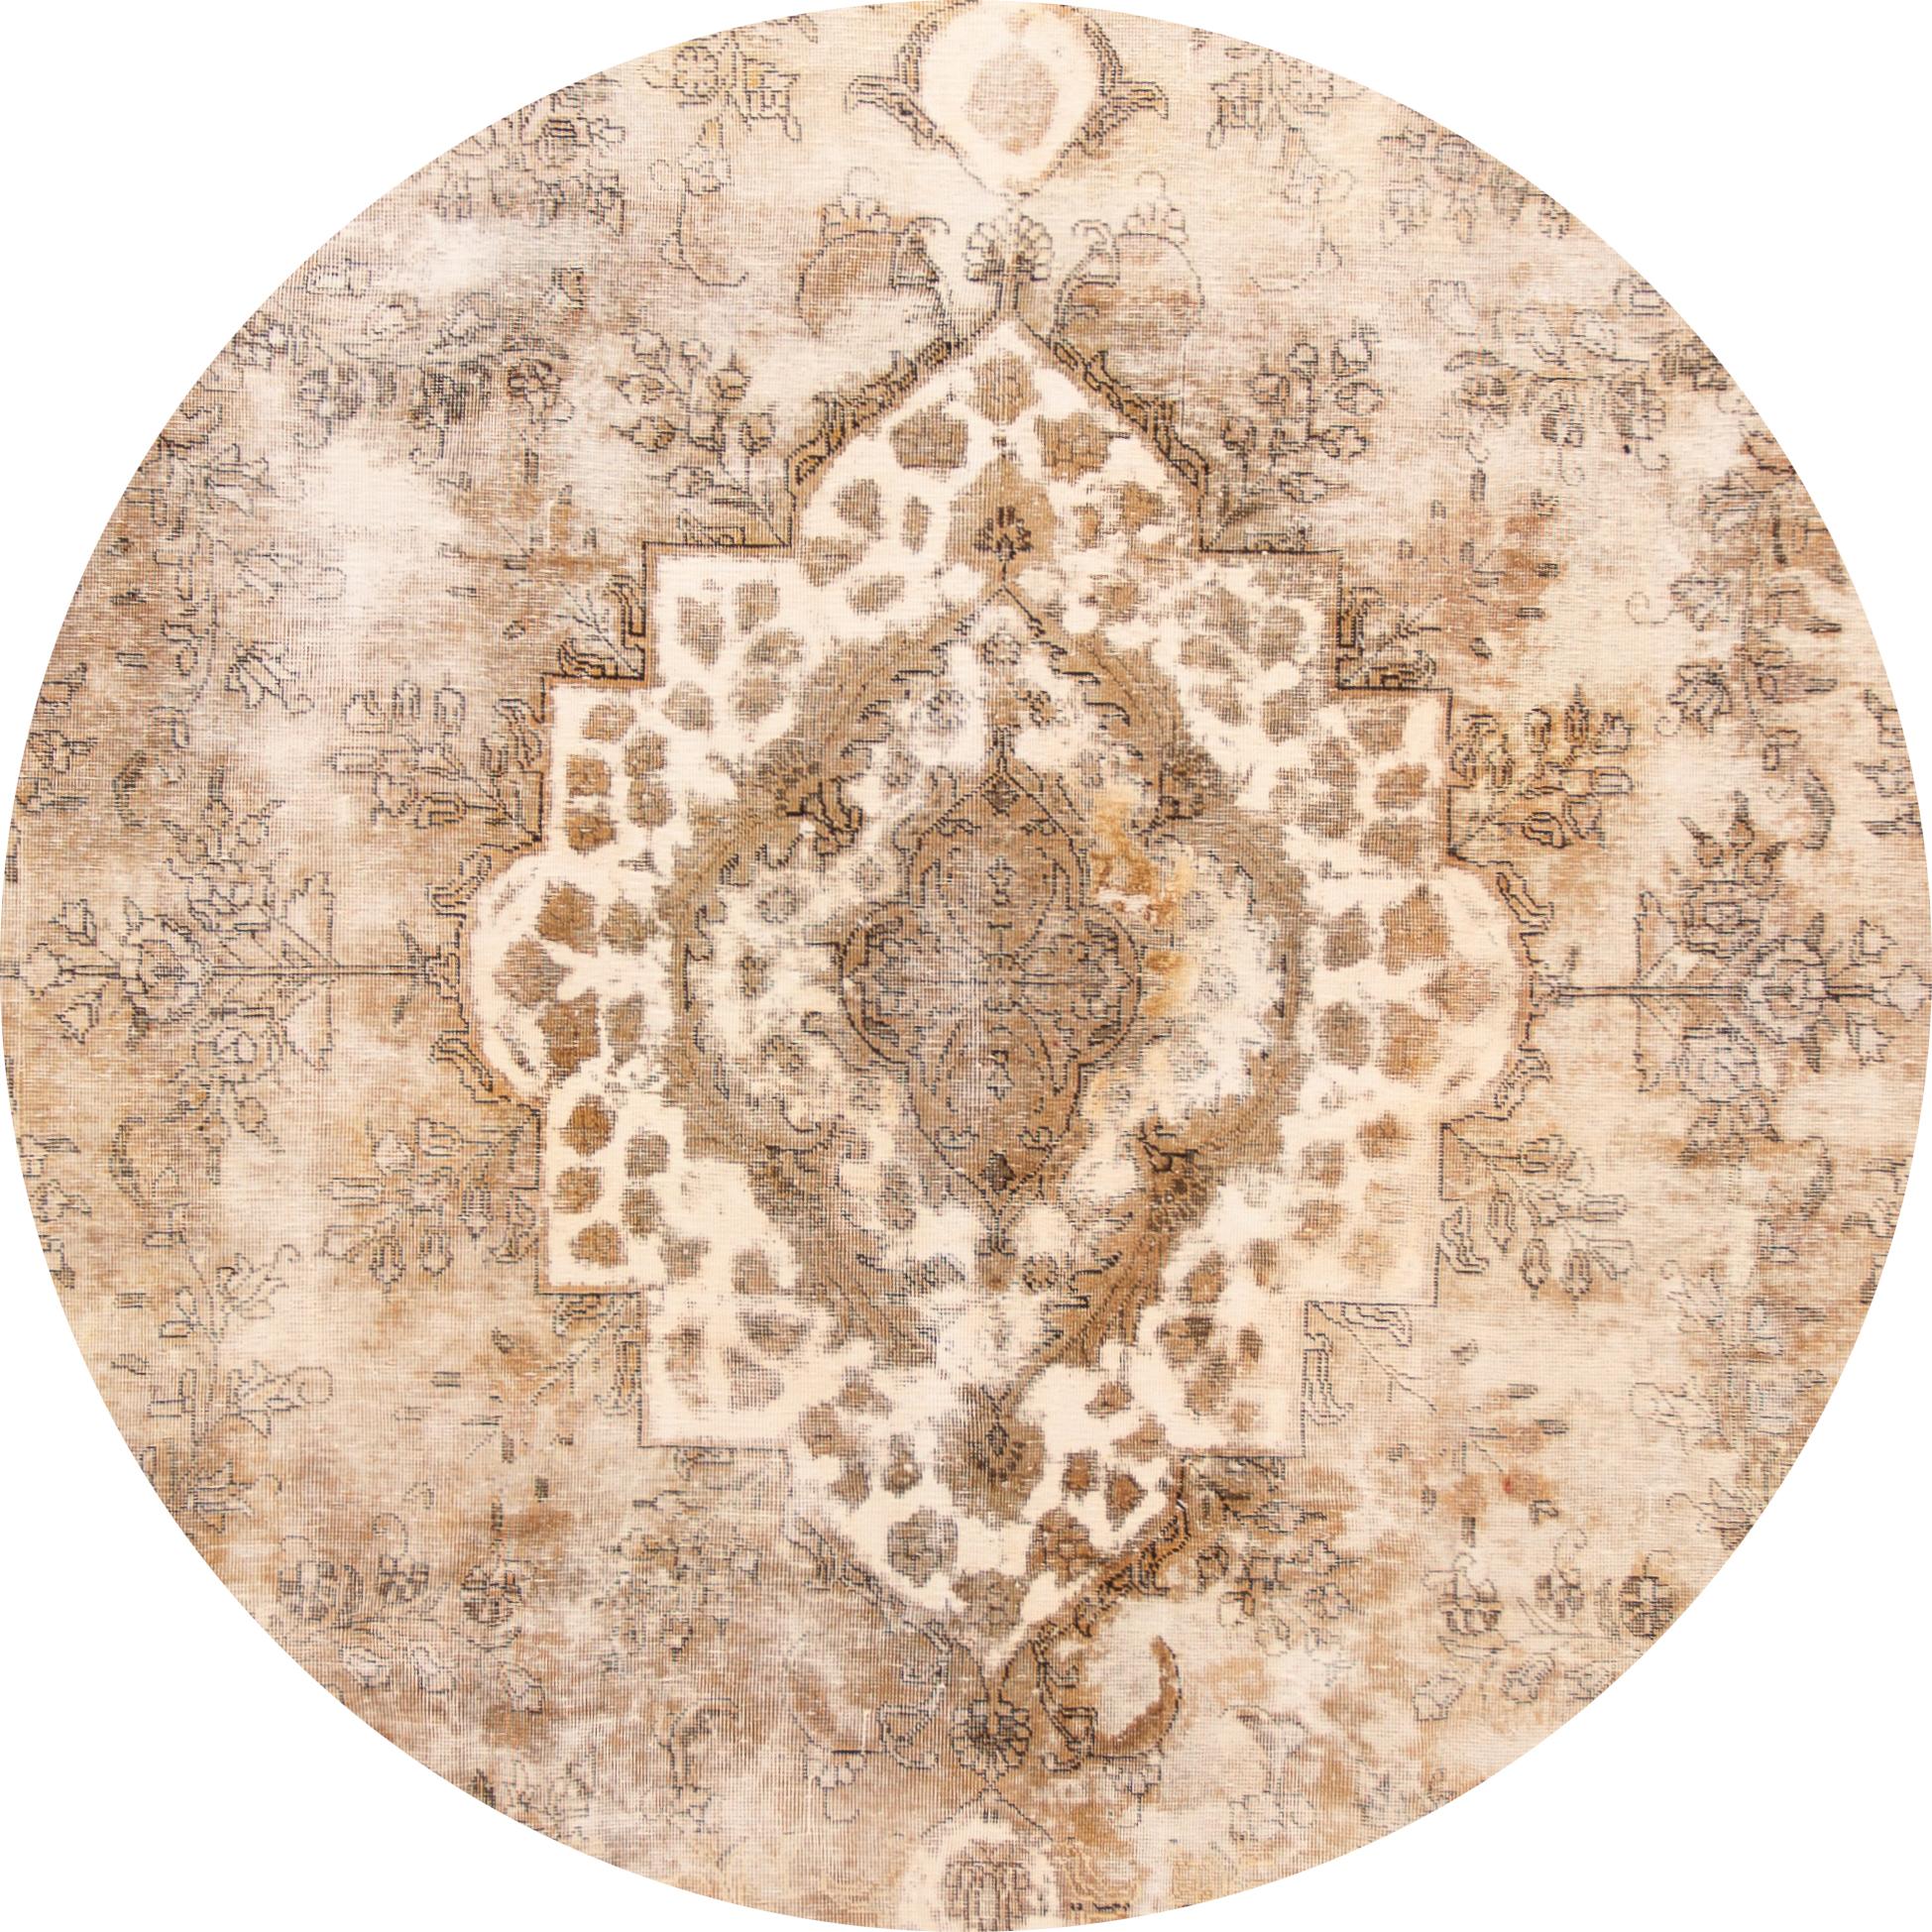 Beautiful antique Tabriz rug, hand knotted wool with a tan field, ivory and brown accents in all-over medallion design.
This rug measures 9' 4